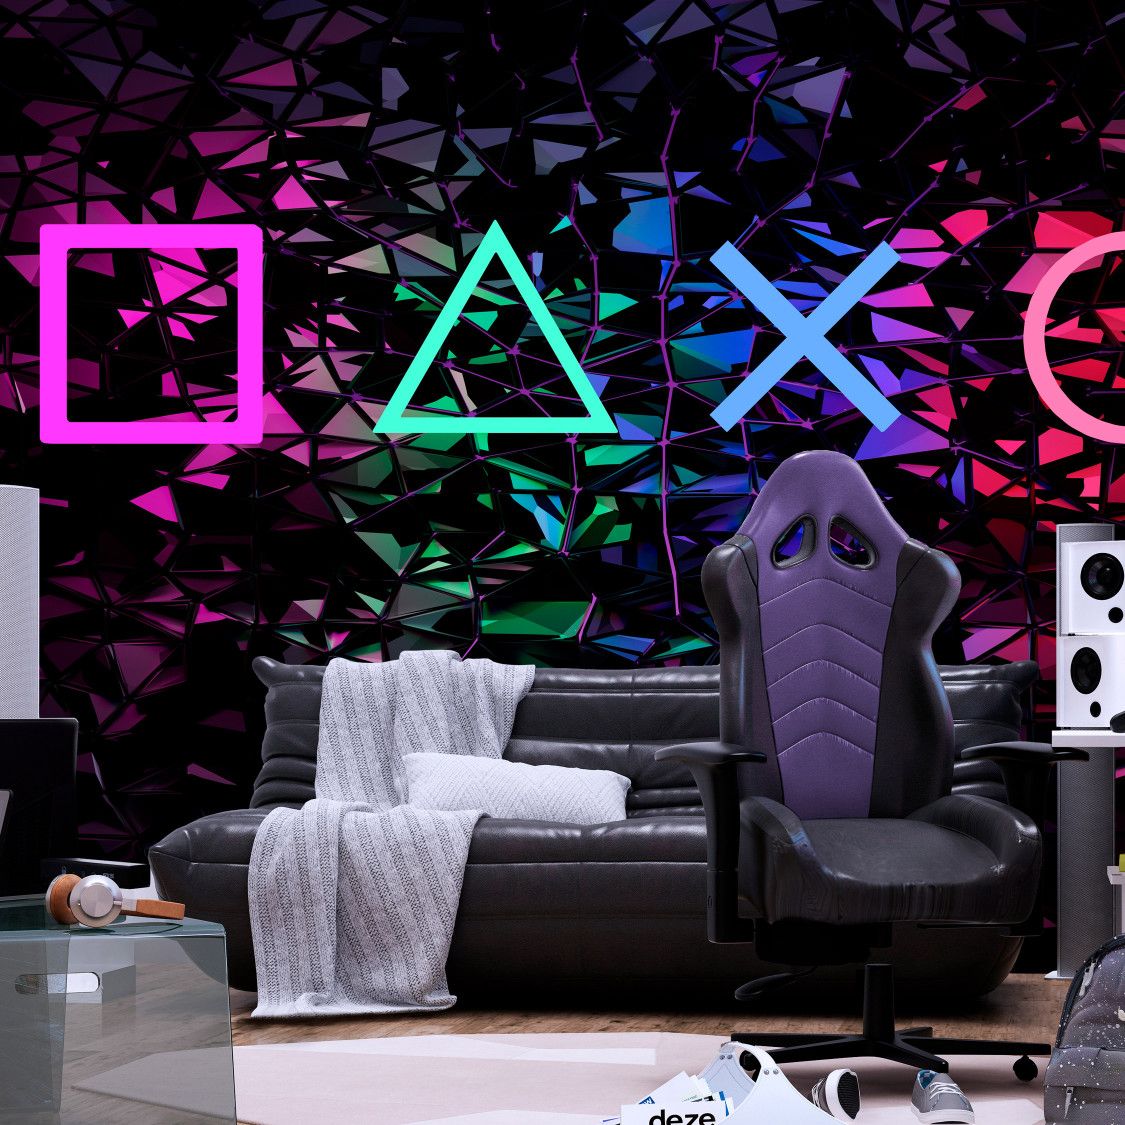 a room that is specifically designed for gaming, you can see a gaming chair, a cosy couch and a wallpaper inspired by gaming controller button symbols and neon mounted on the wall